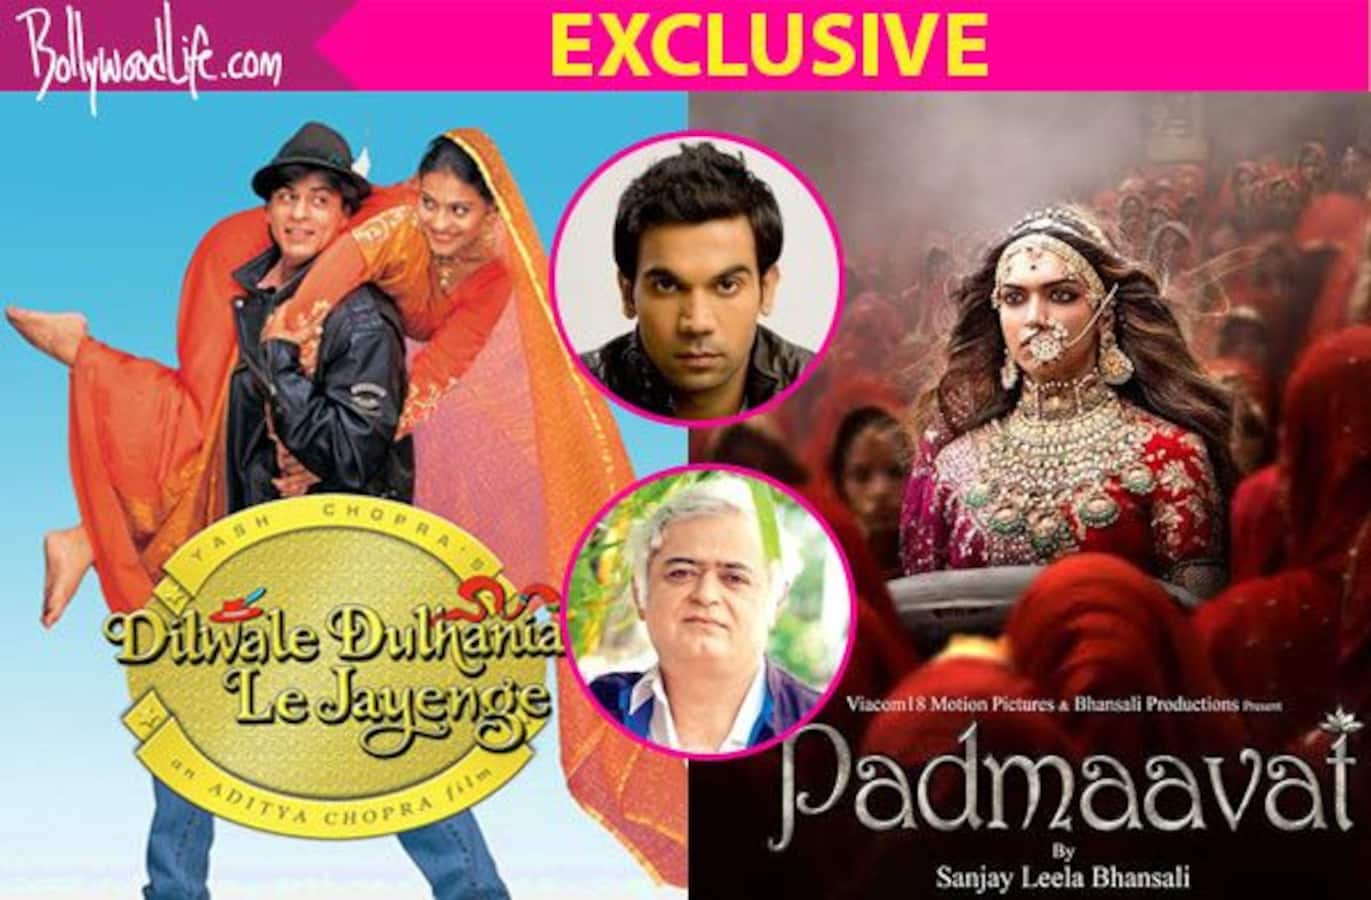 Rajkummar Rao gives an interesting plot twist to Padmaavat and Dilwale Dulhania Le Jayenge - watch exclusive video to find out!